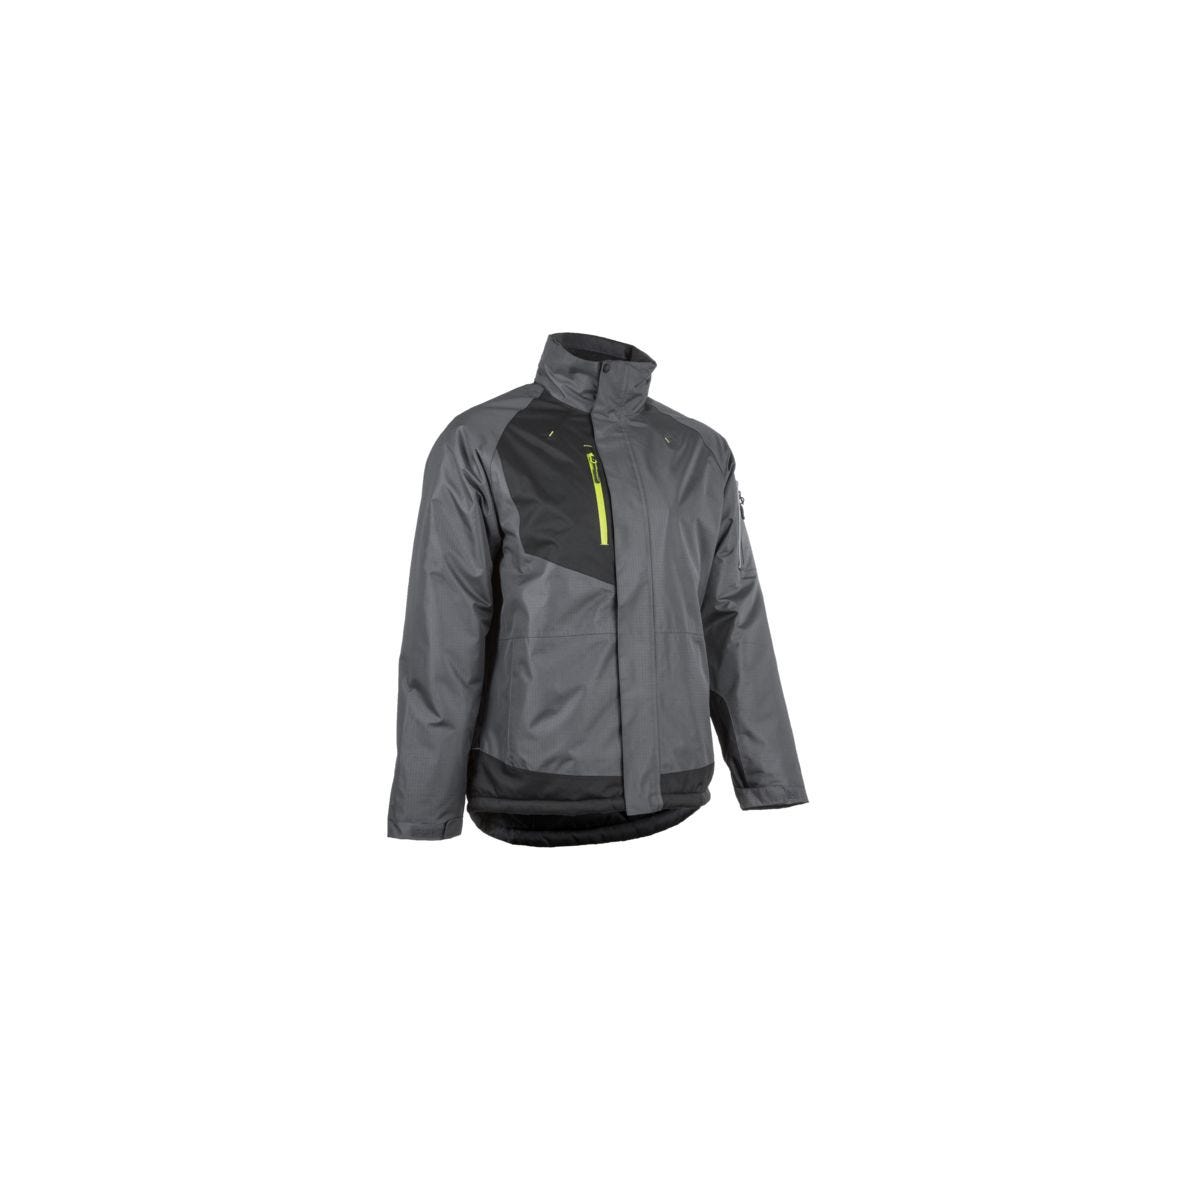 YUZU Parka anthracite/noir, Polyester Ripstop + Polaire 300g/m² - COVERGUARD - Taille XL 0